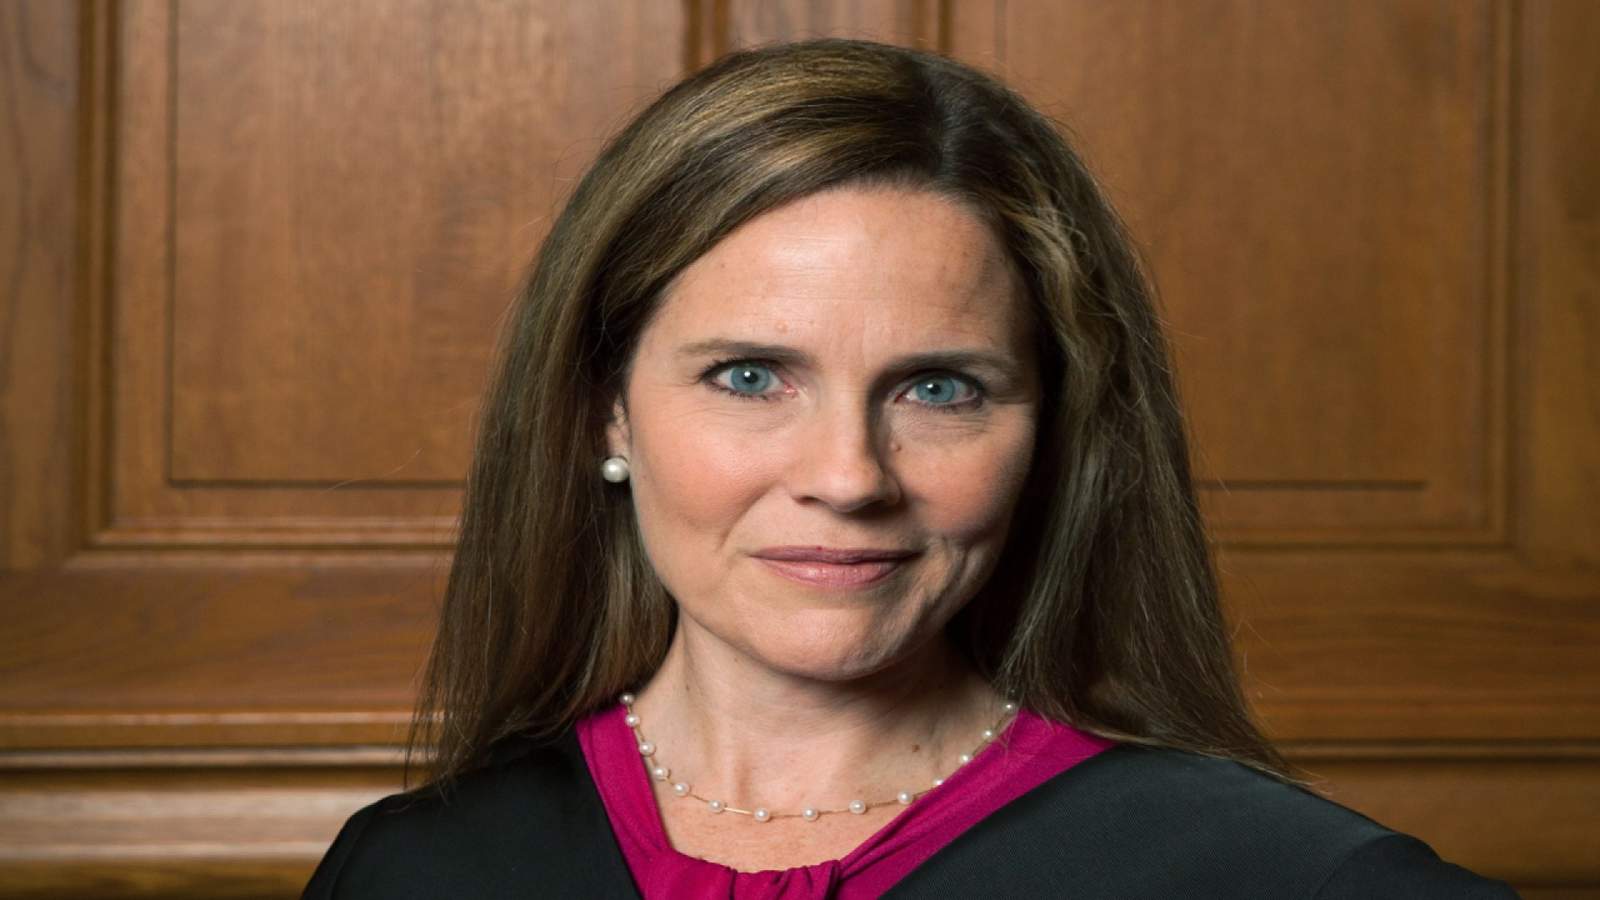 Trump expected to pick Amy Coney Barrett for Supreme Court